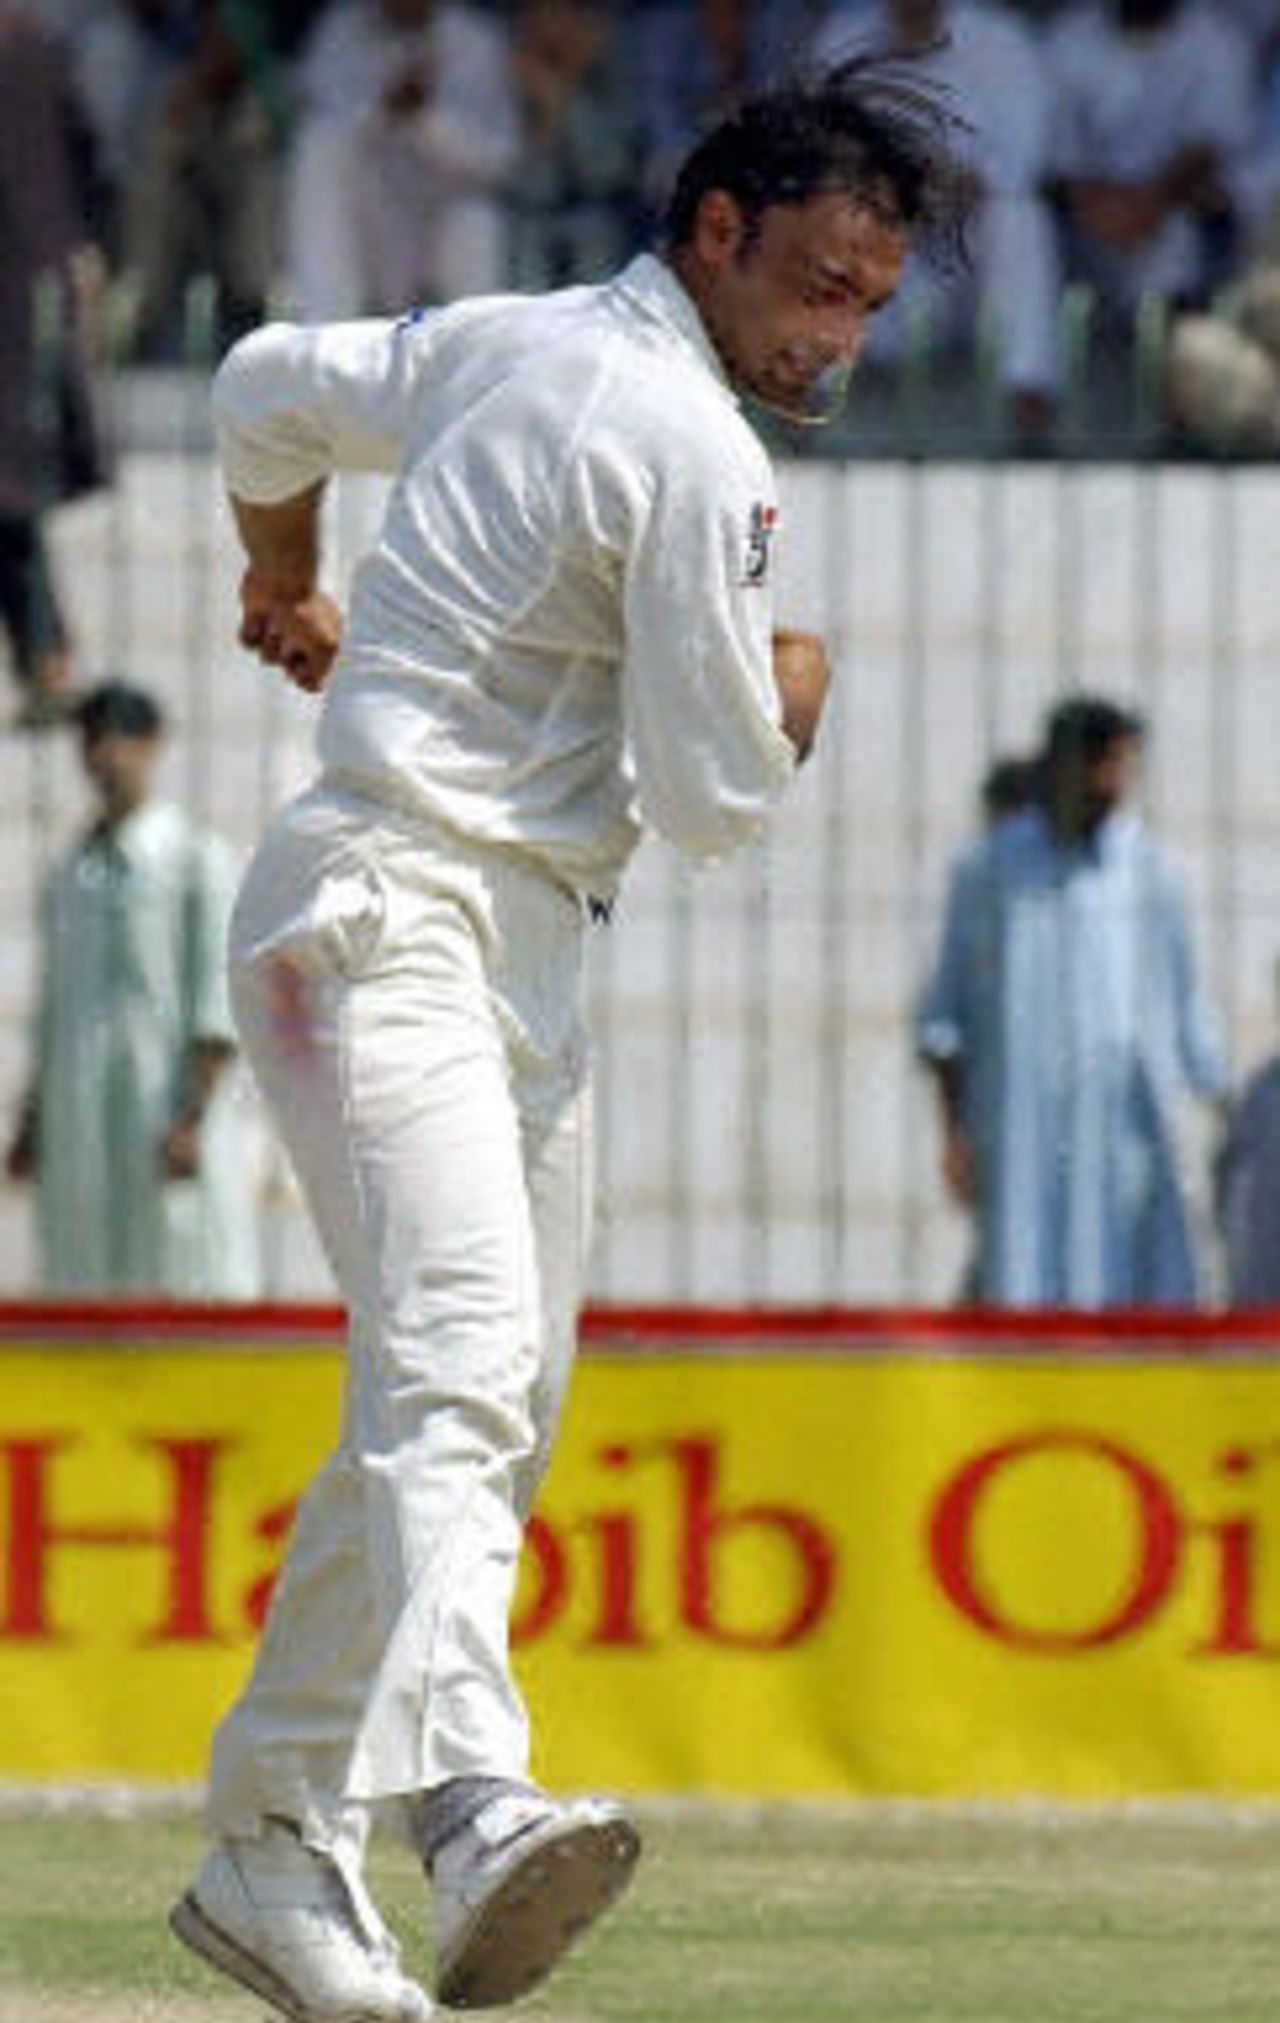 Shoaib Akhtar celebrates dismissing Rajin Saleh (not in the picture) after completing his 100 Test wickets on the fourth day of the second Test between Pakistan and Bangladesh in Peshawar, 30 August 2003.